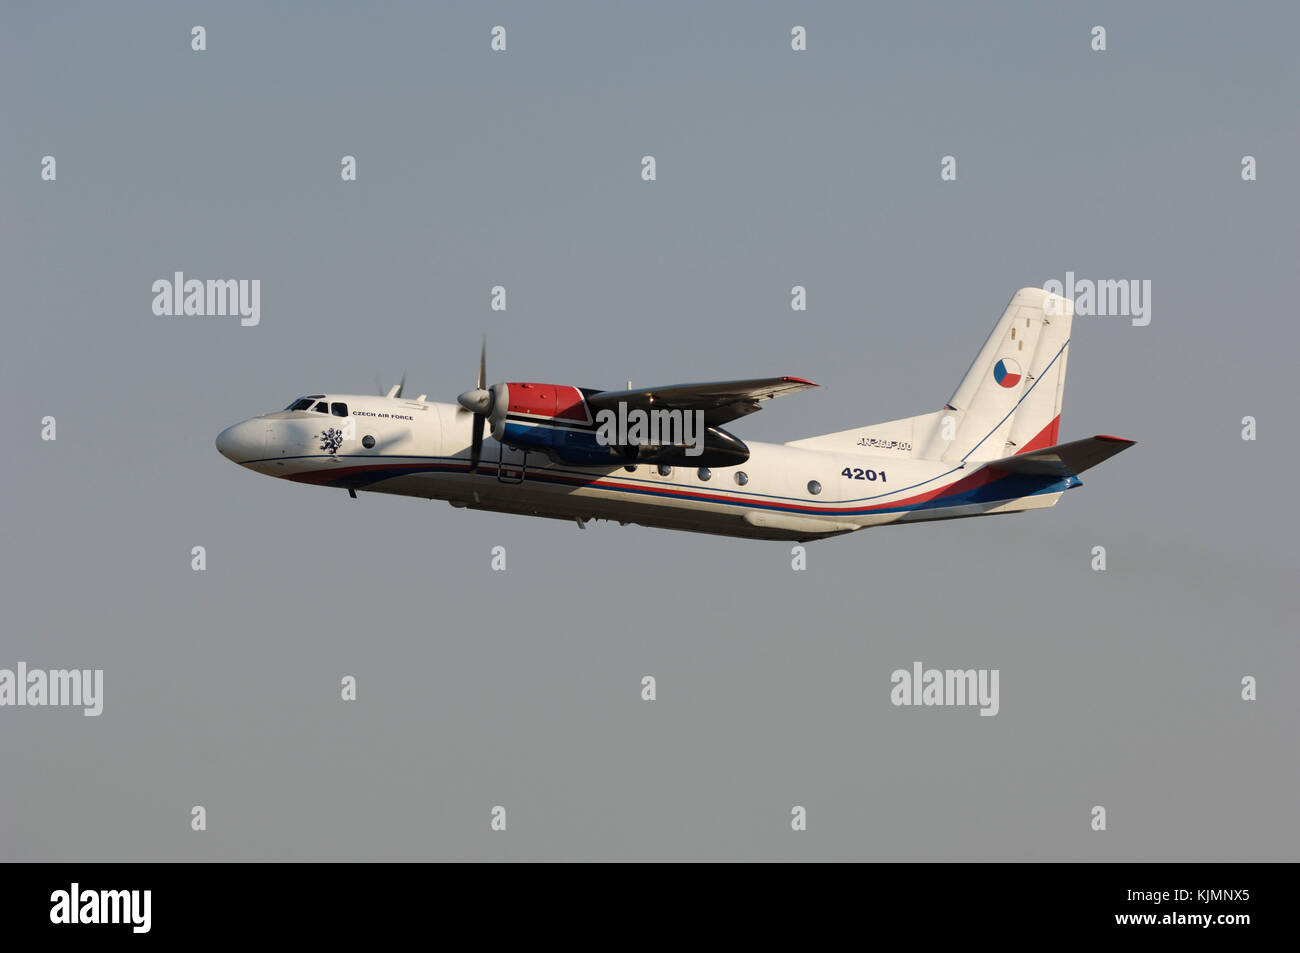 Czechia Republic Air Force Antonov An-26 Curl climbing out after take-off Stock Photo